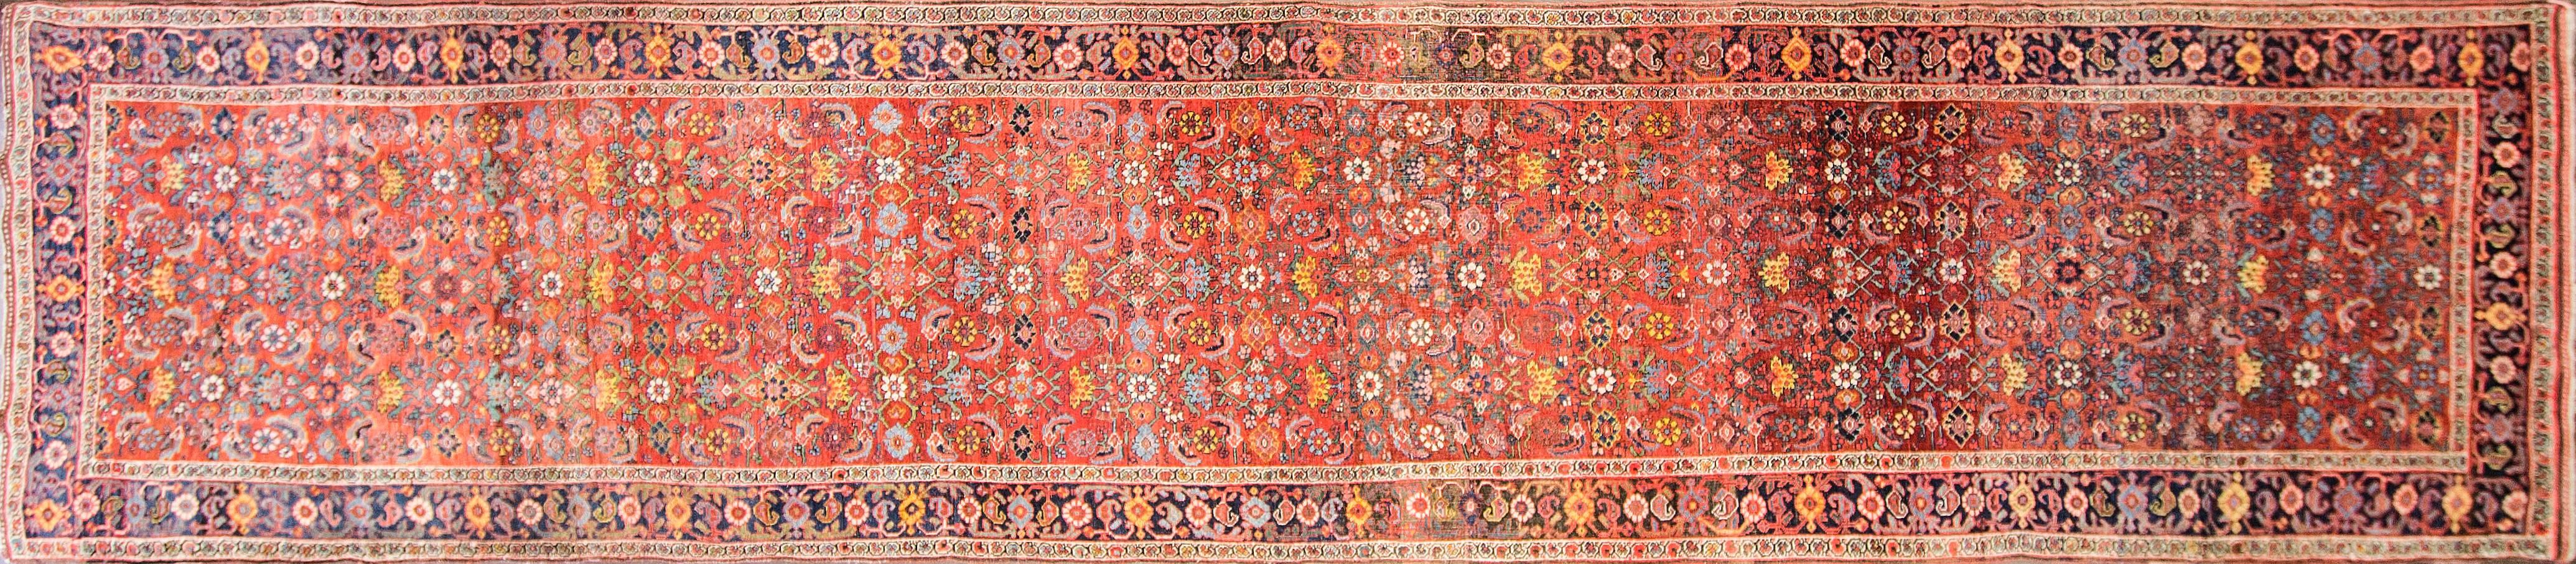 These rugs are very heavy in relation to their size and sturdy and sometimes impossible to fold them because of their knotting technique. The material is wool knotted on wool foundation and the wool dyed with vegetable colors.
This rug made in